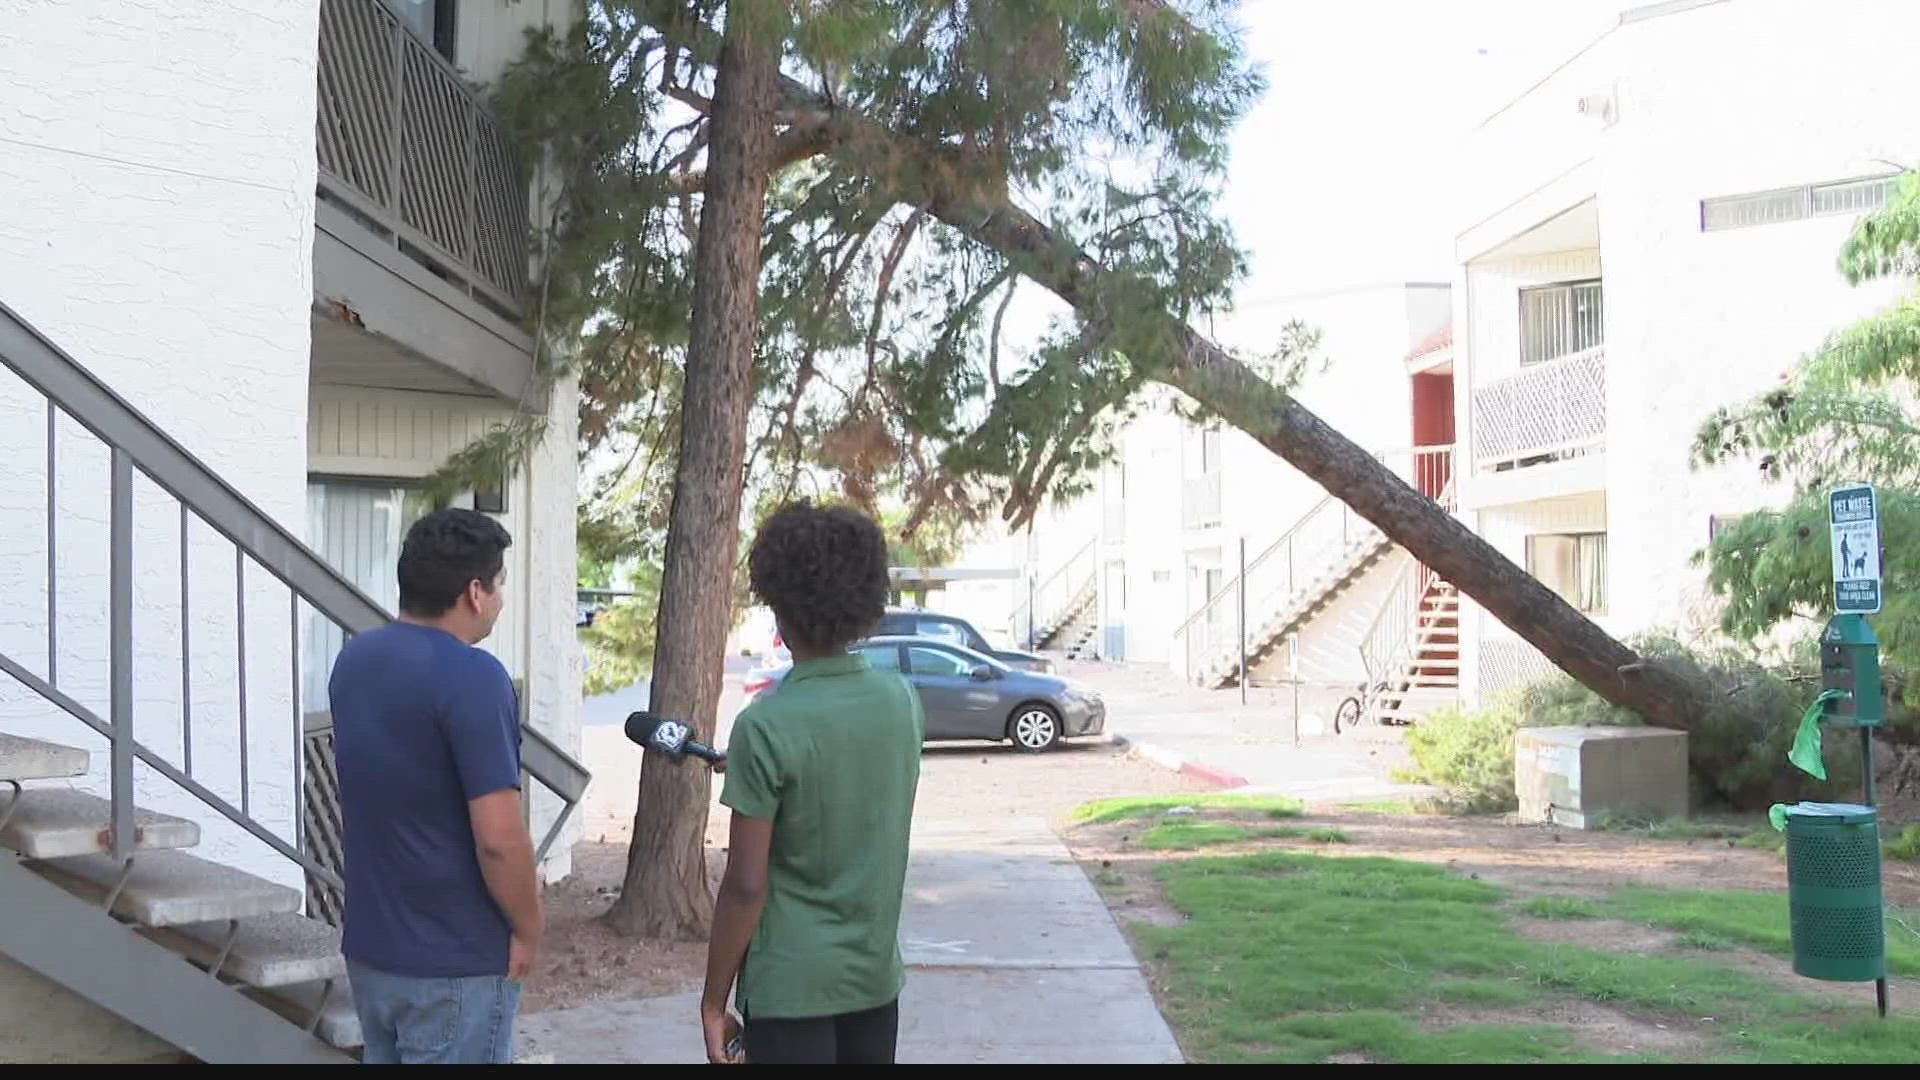 People in the Valley are facing cleanup and repairs after monsoon storms that rolled through over the weekend.